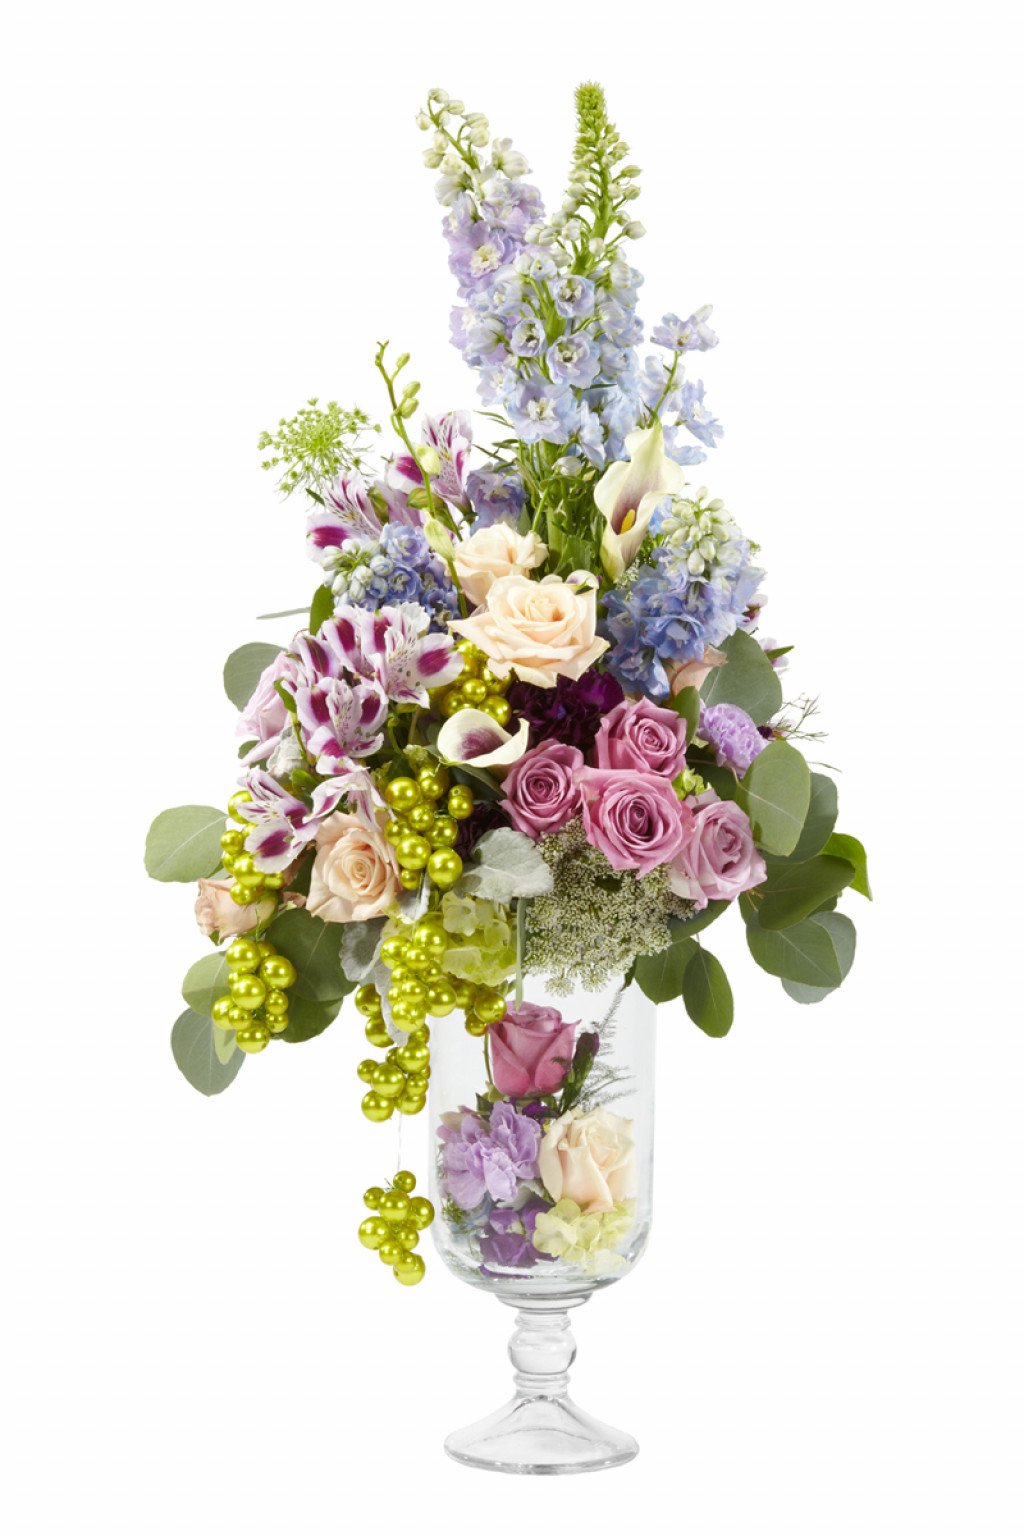 Tall Wedding Centerpieces: Topiary to Trumpet Vase, Find the Best